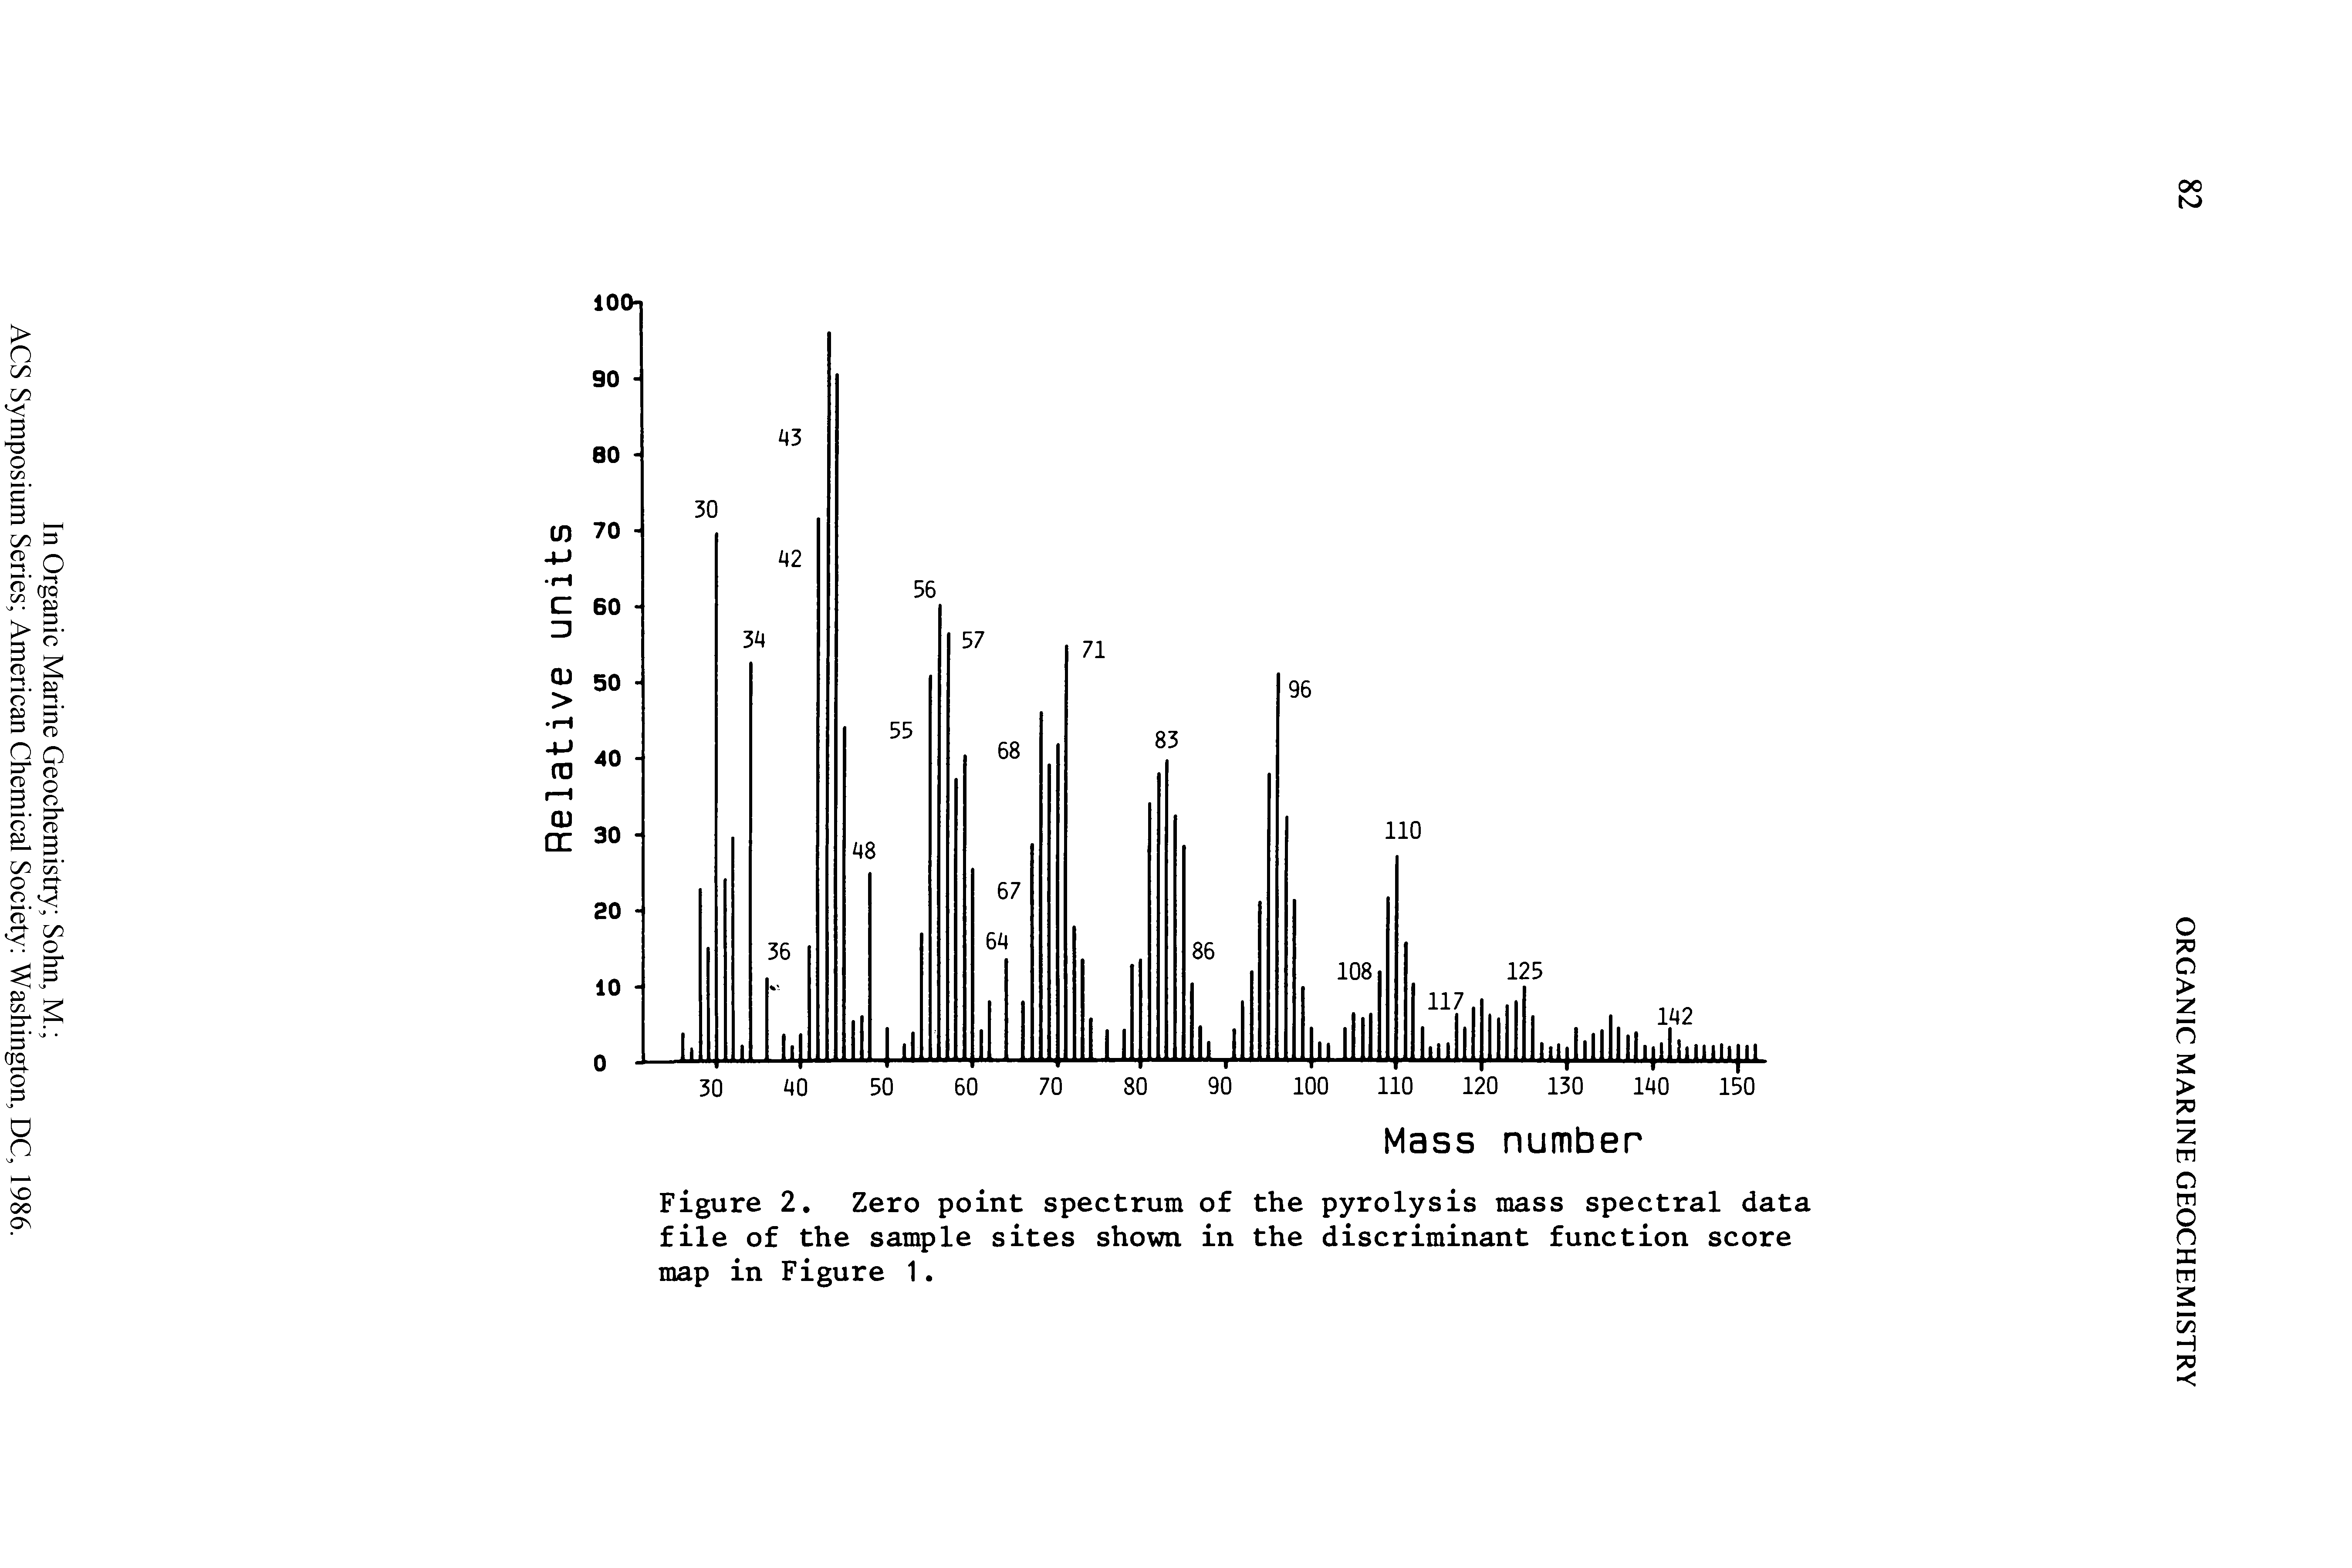 Figure 2. Zero point spectrum of the pyrolysis mass spectral data file of the sample sites shown in the discriminant function score map in Figure 1.